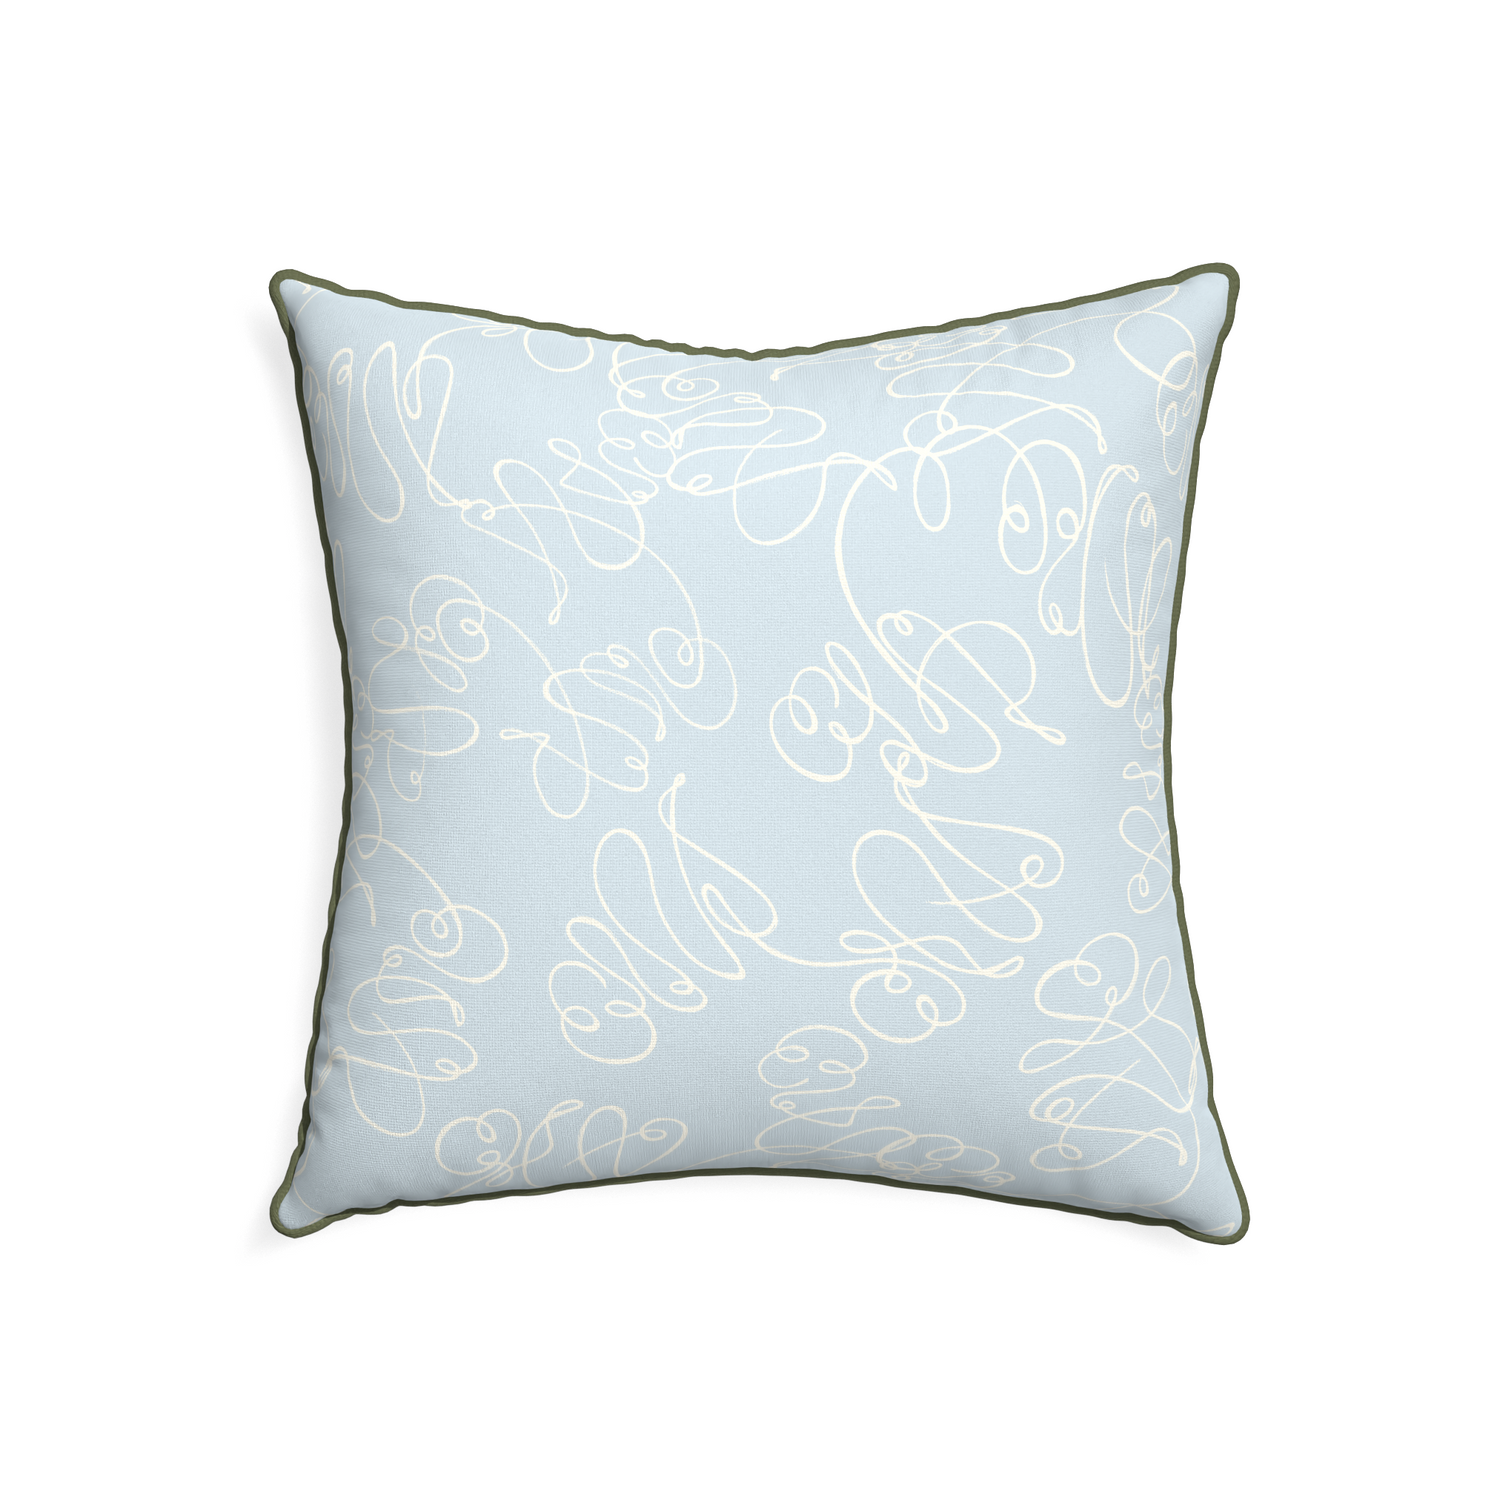 22-square mirabella custom pillow with f piping on white background